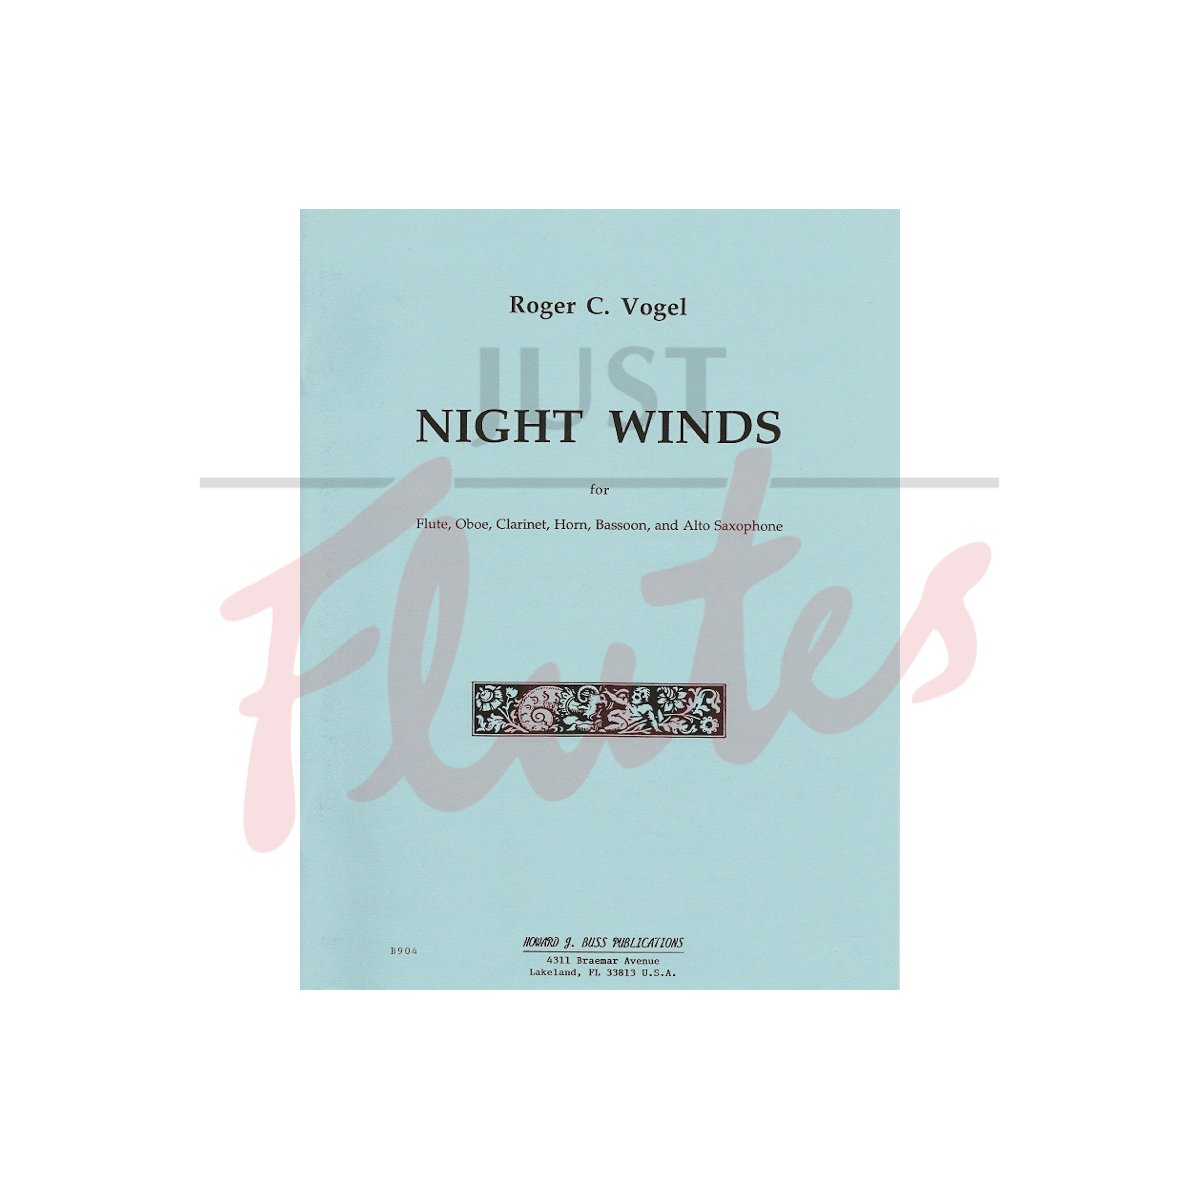 Night Winds for Flute, Oboe, Clarinet, Horn, Bassoon and Alto Saxophone